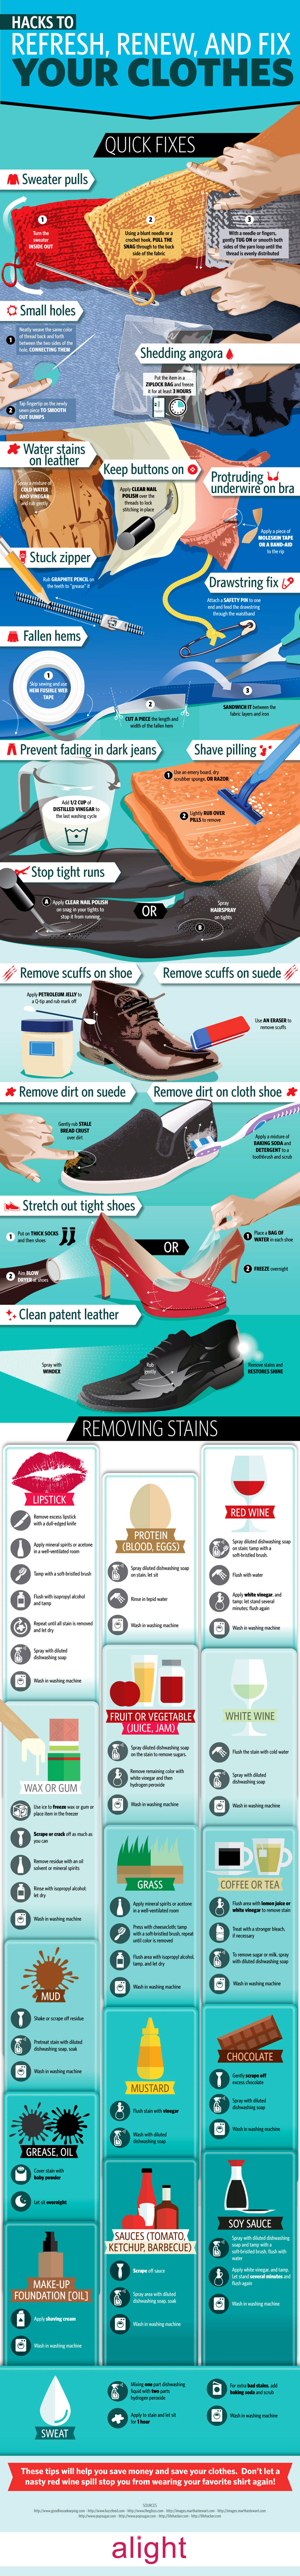 Refresh, Repair and Renew Clothes - Clothing Hacks Infographic